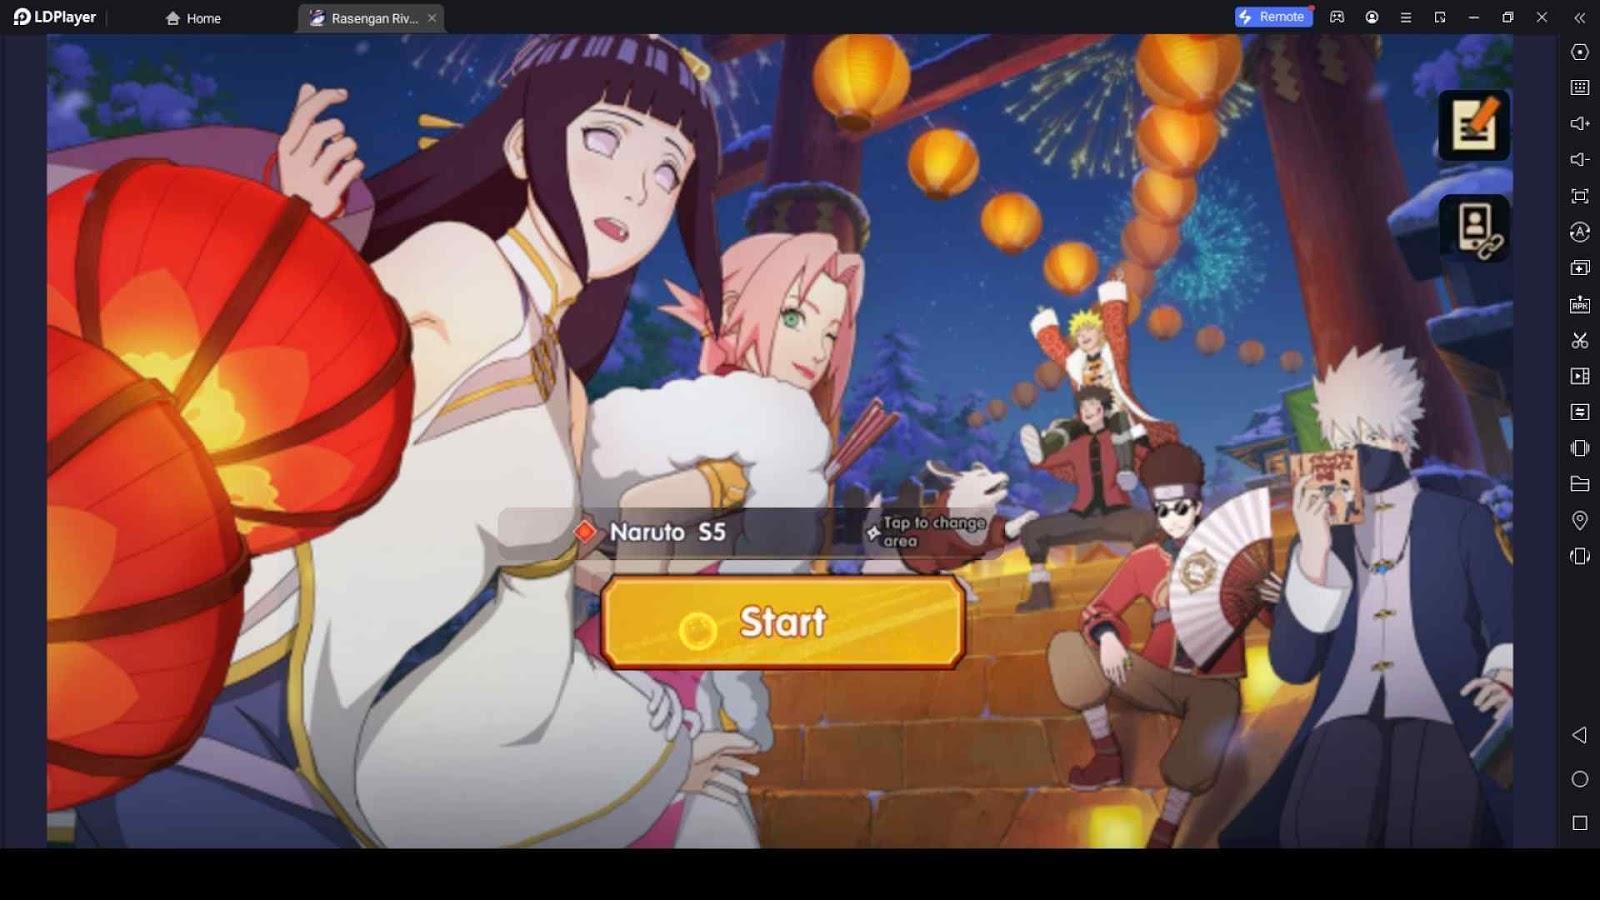 Naruto Shippuden: Ultimate Ninja Storm 4 Hints and Tips for a